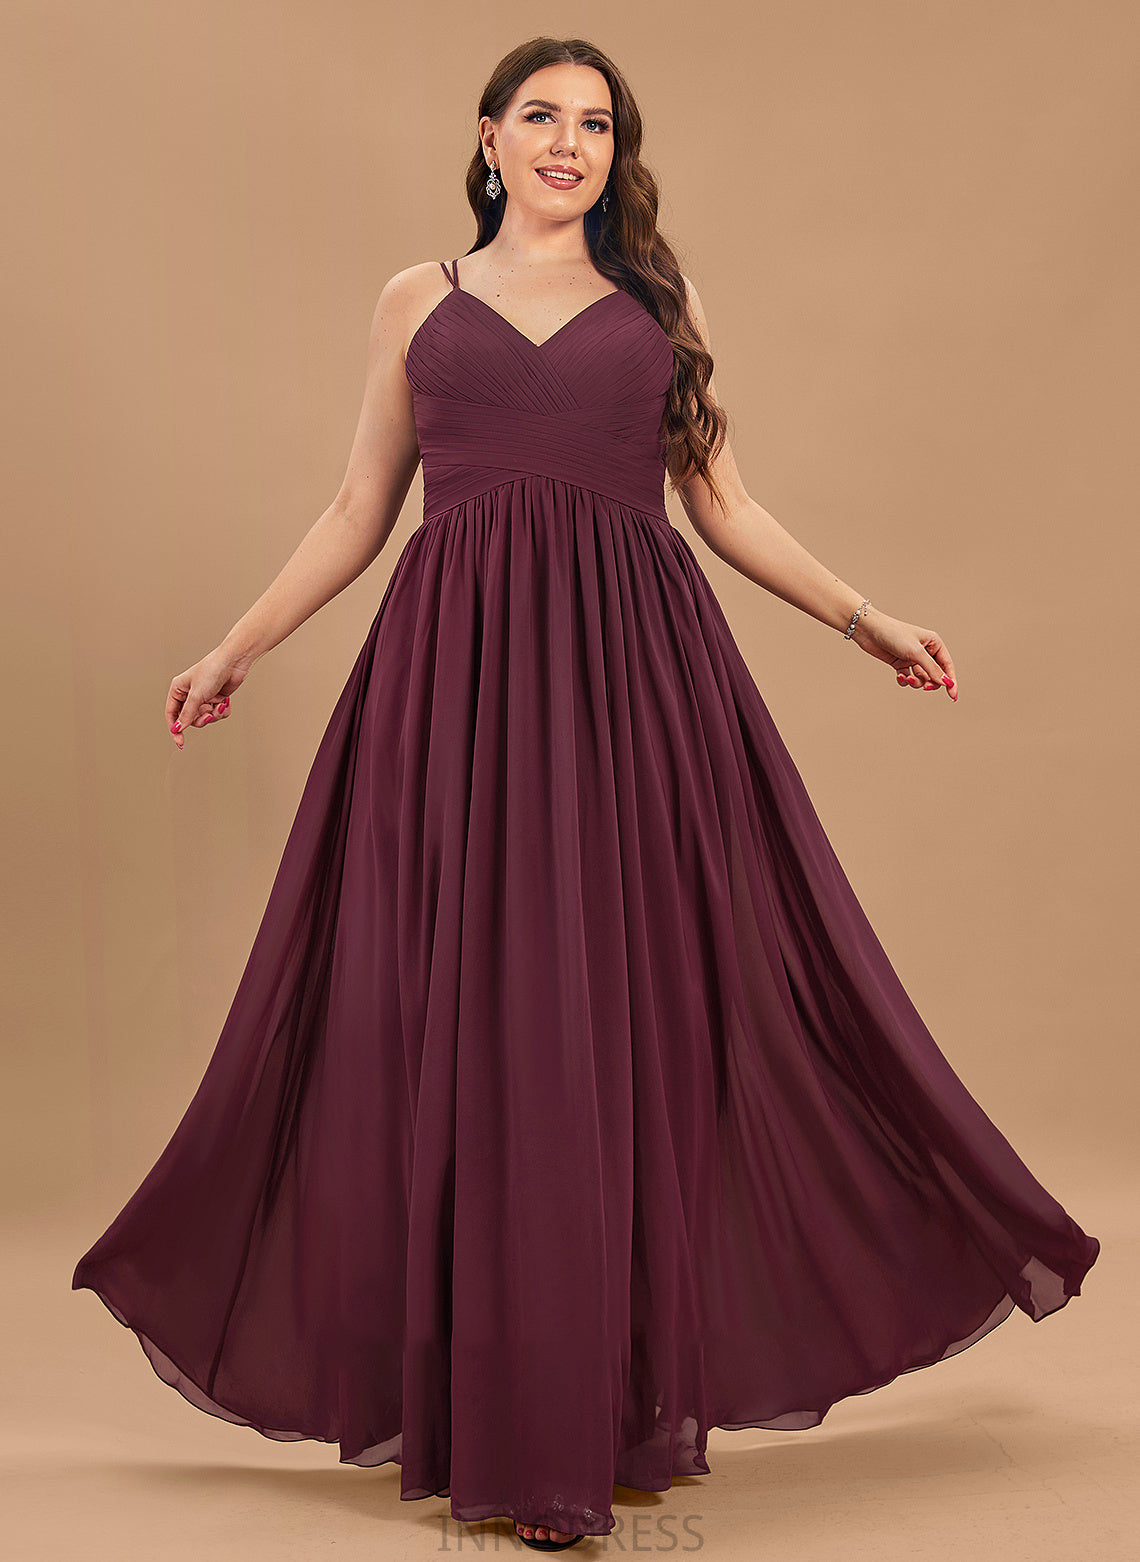 With Lace Aileen Floor-Length Chiffon A-Line Prom Dresses V-neck Ruffle